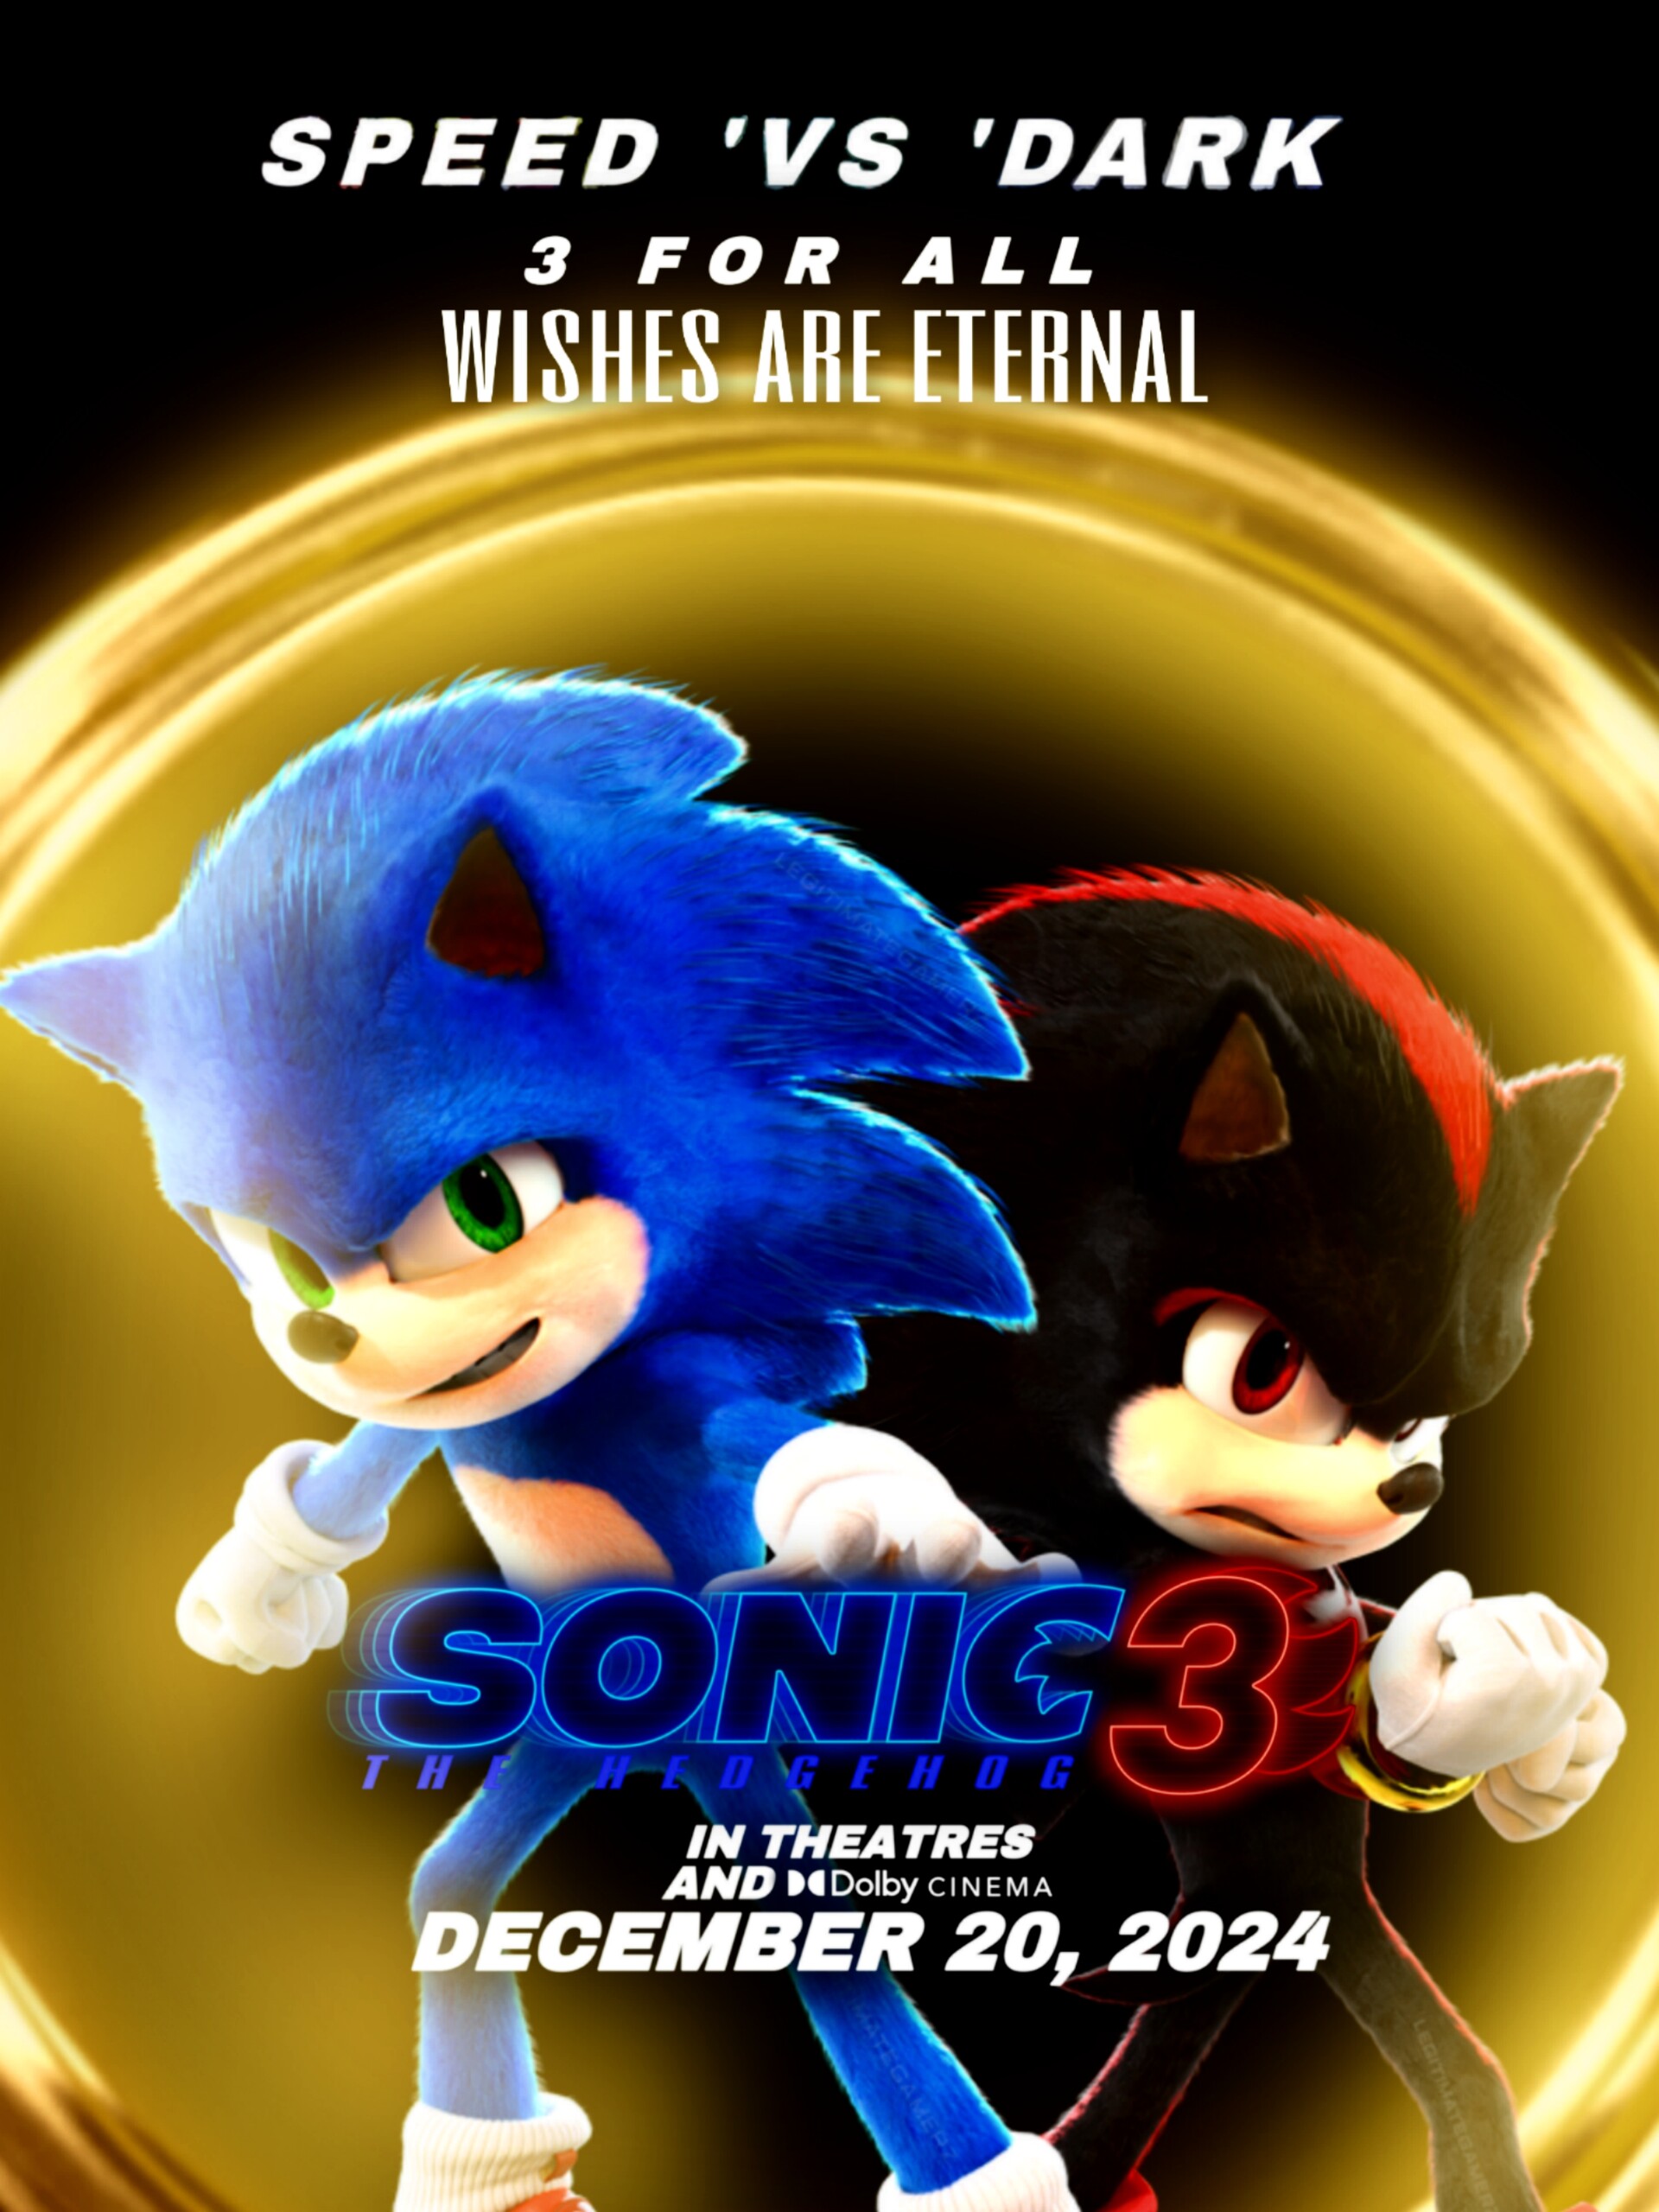 Sonic Movie 3 Teaser Concept Poster (Wishes Are Eternals)